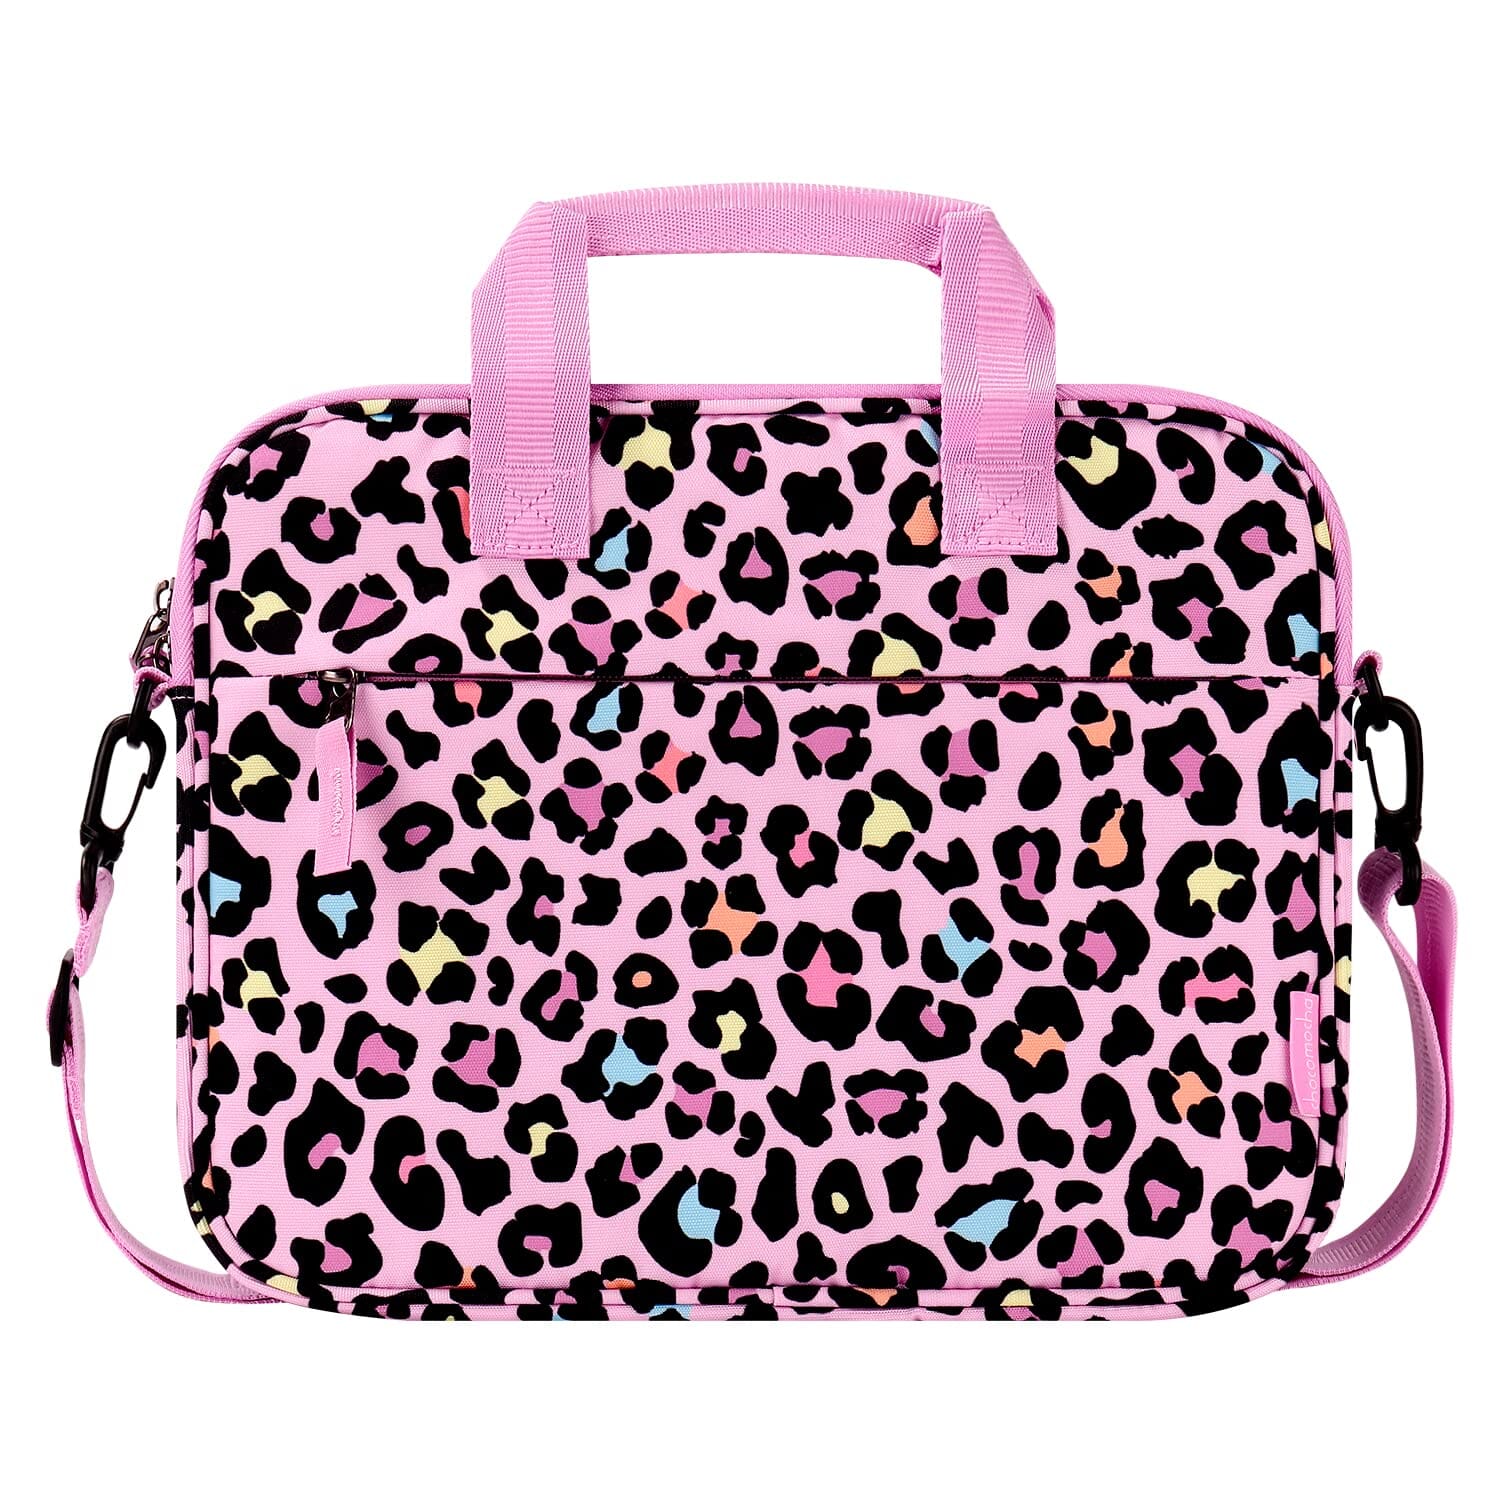 Choco Mocha 12.5 Inch Kids Tablet Sleeve Bag for Girls, Kids Tablet Carrying Case for Fire HD 10, Fire 7, Fire HD 8, Fire 10 Tablet, Kindle Kids Edition, Apple iPad, Leopard Pink chocomochakids 